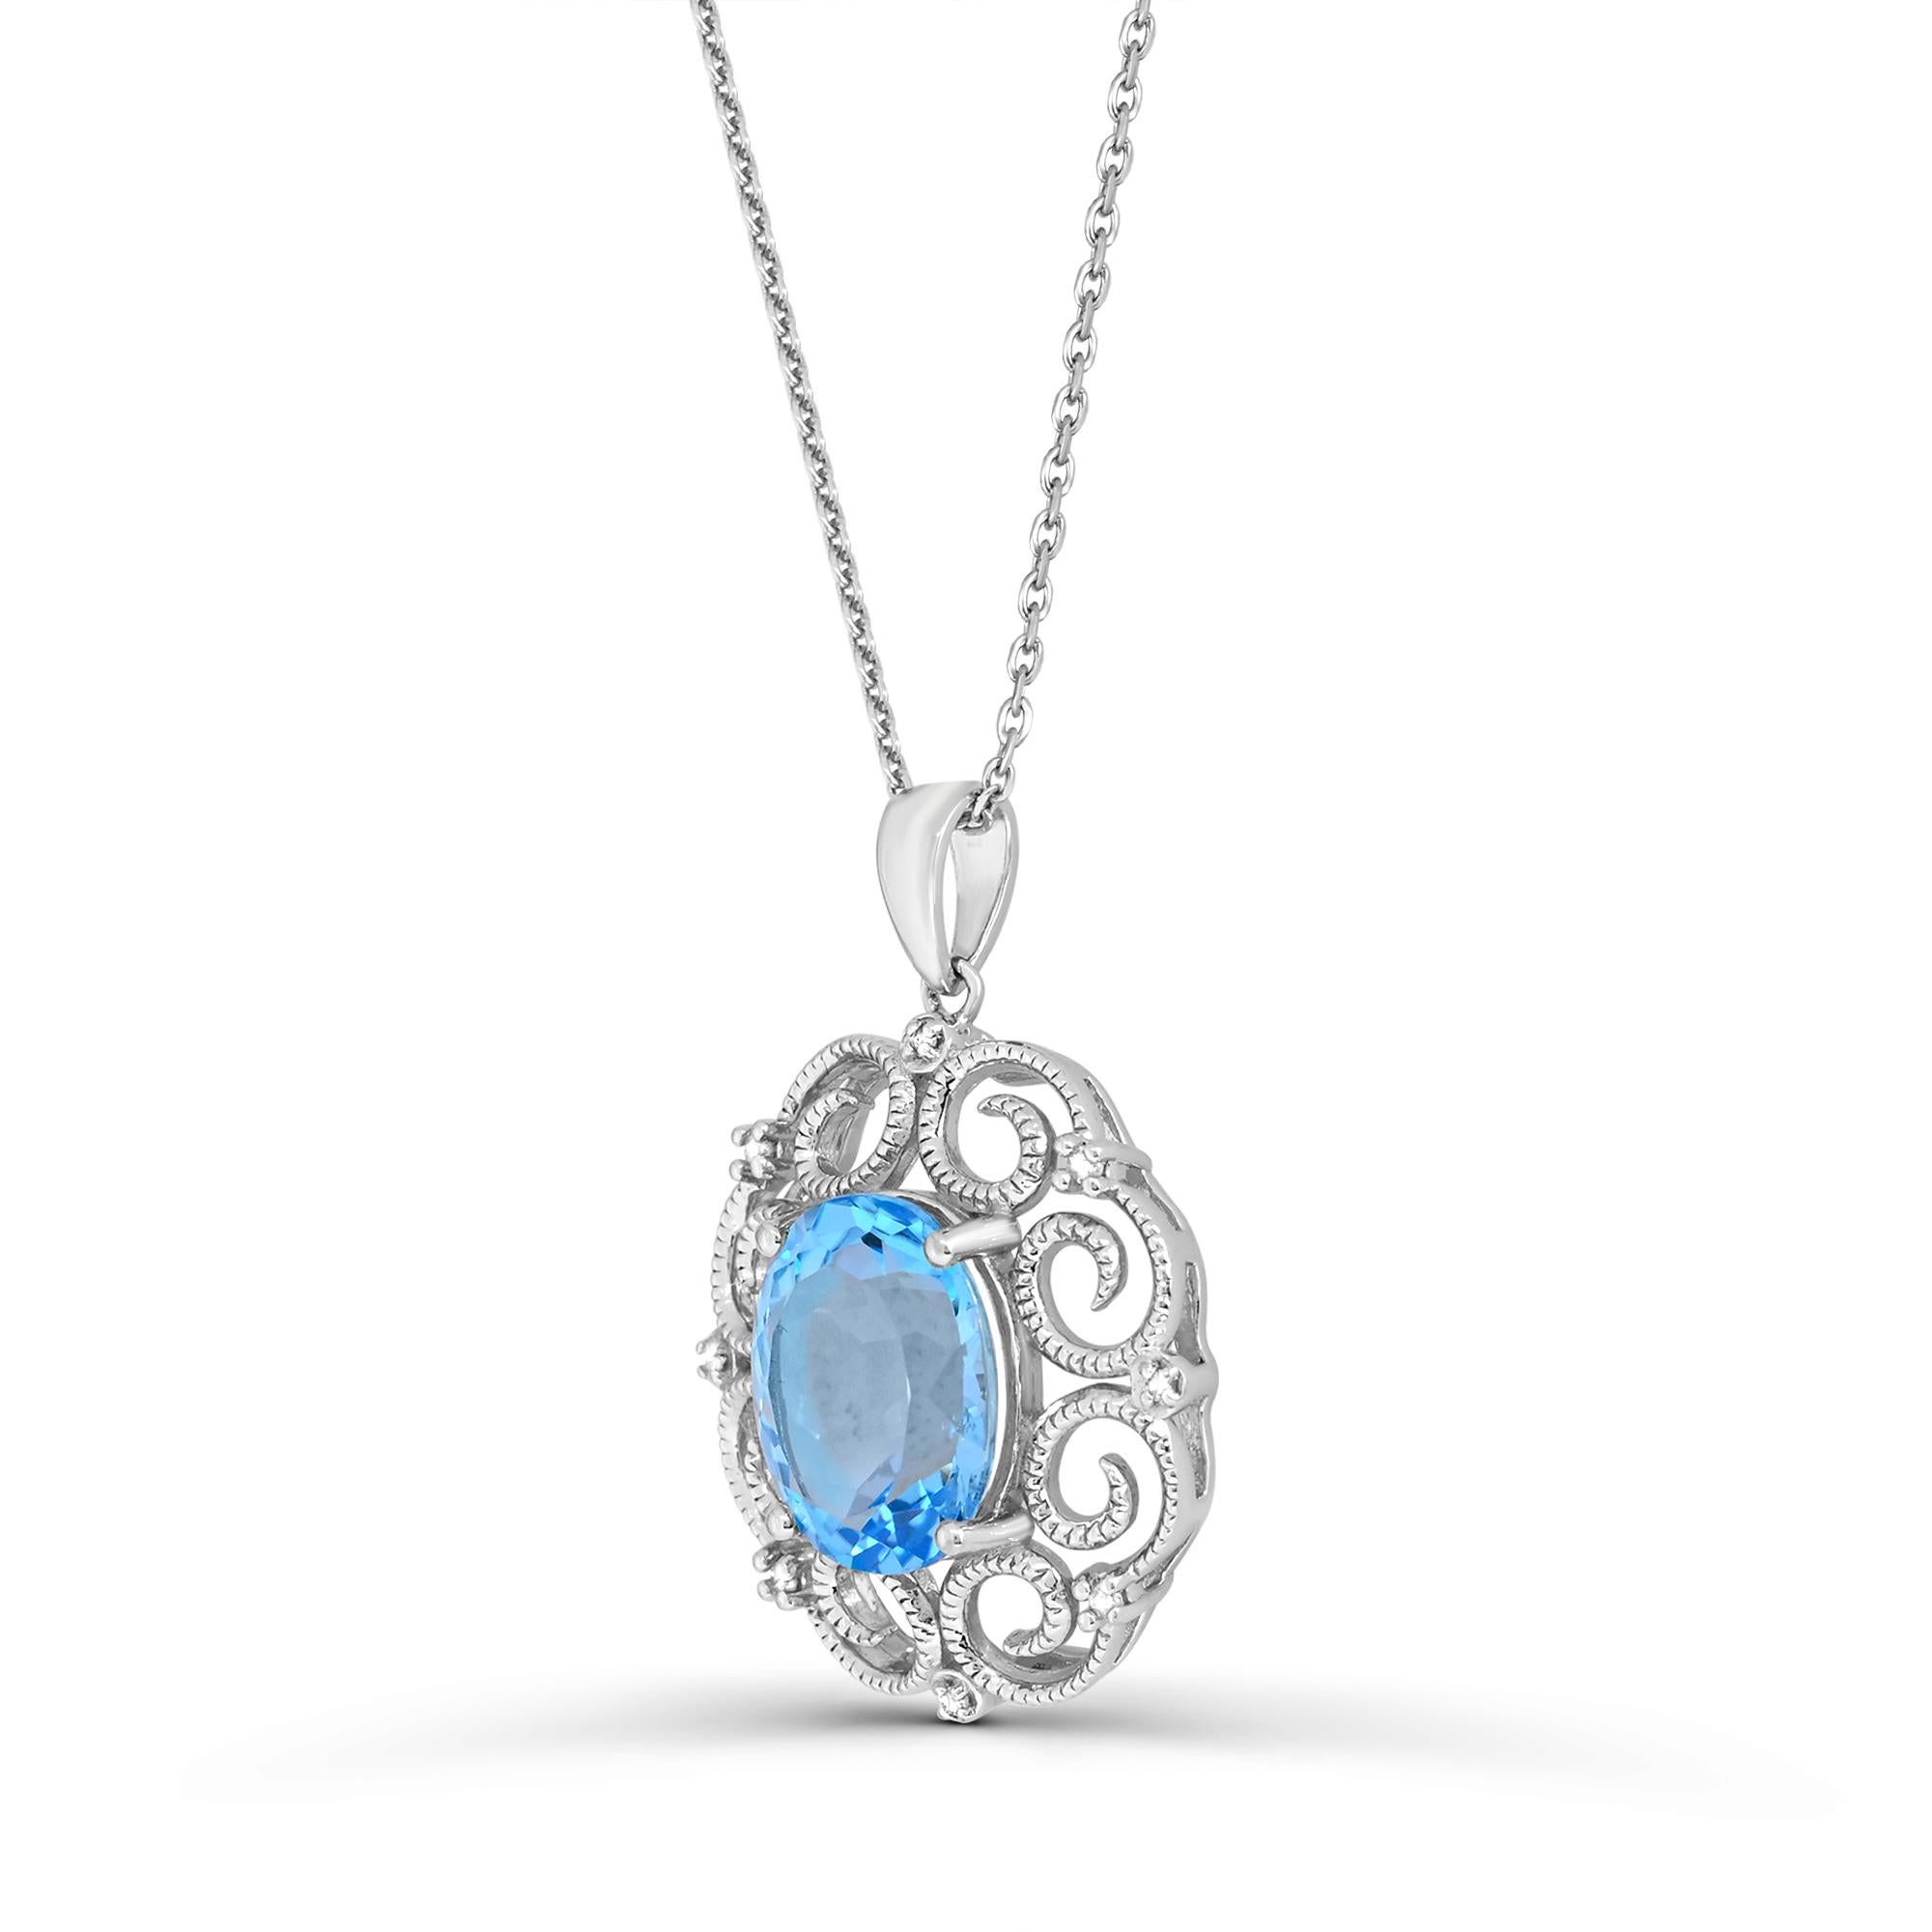 Indulge in the elegance of our Swiss Blue Topaz and White Diamond Retro Border Pendant Necklace in Sterling Silver. Crafted with meticulous attention to detail, this necklace boasts a stunning combination of one oval Swiss blue topaz accented by